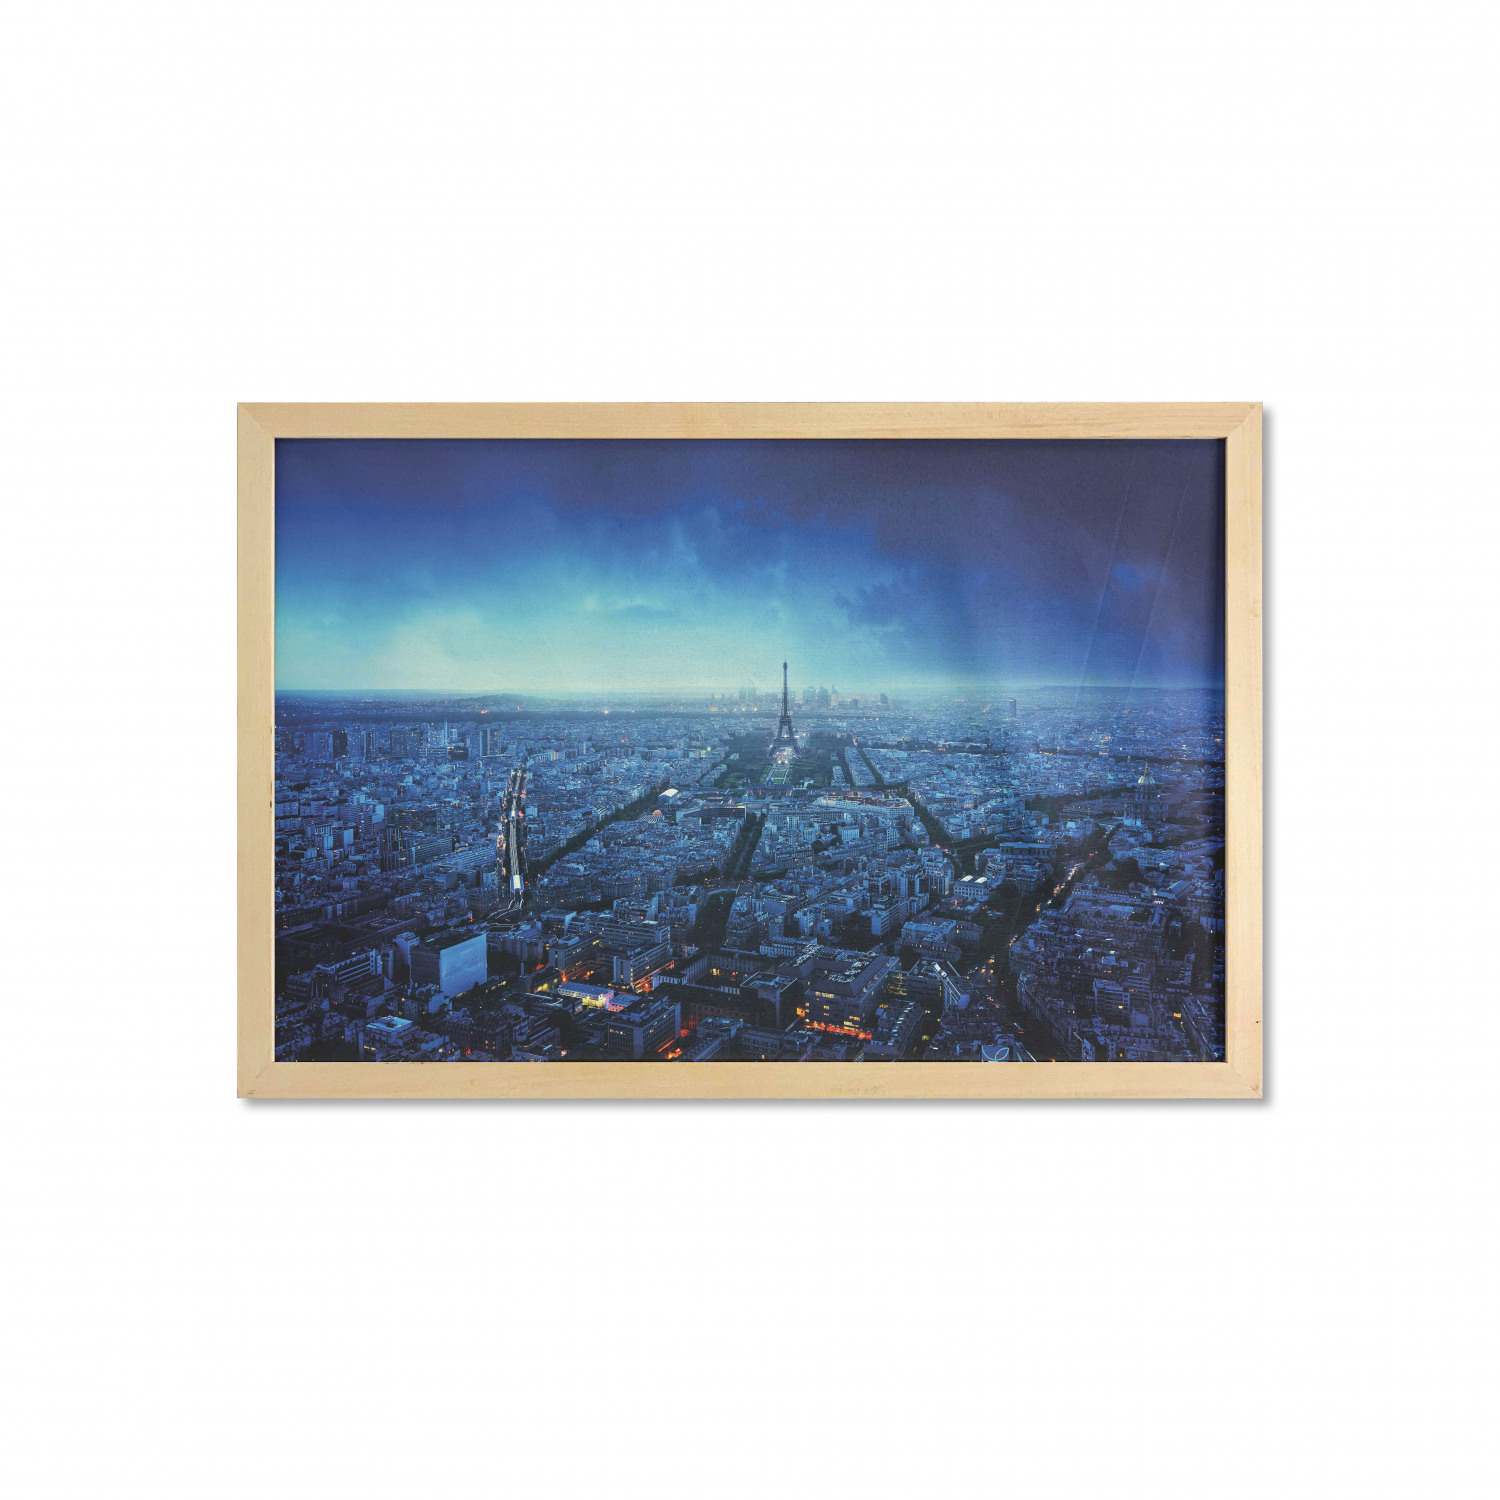 Cityscape Wall Art with Frame, Skyline at Sunset France European Parisian Landmark Travel Destination Monochrome, Printed Fabric Poster for Bathroom Living Room, 35" x 23", Navy Blue, by Ambesonne - image 1 of 2